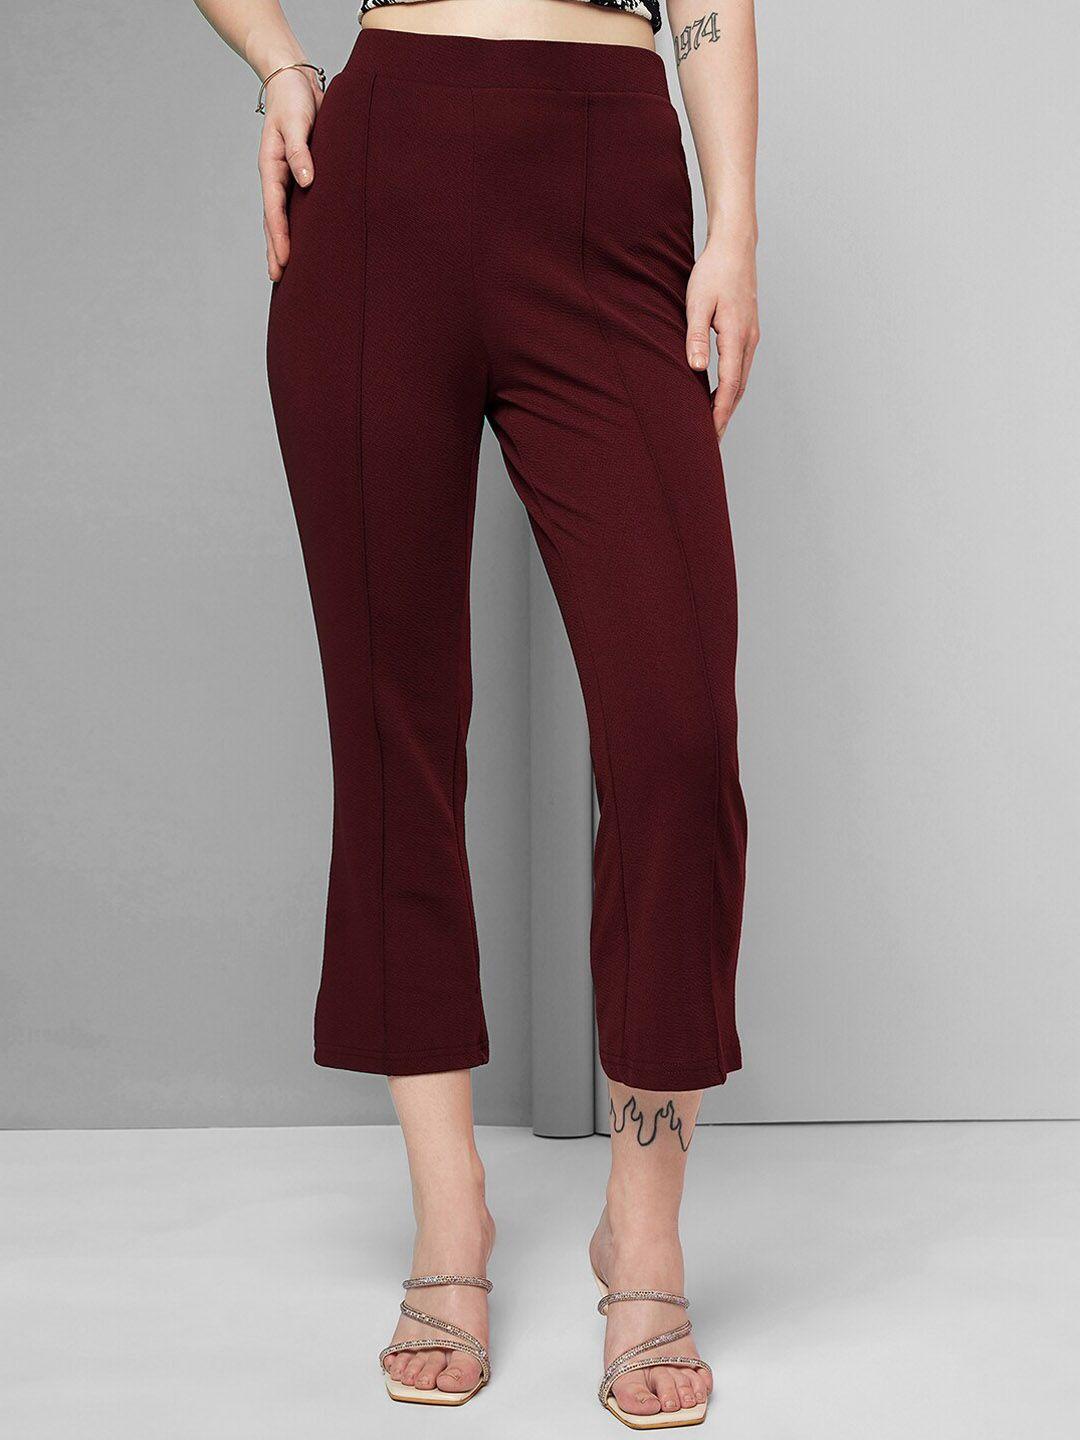 selvia-women-mid-rise-easy-wash-chinos-trousers